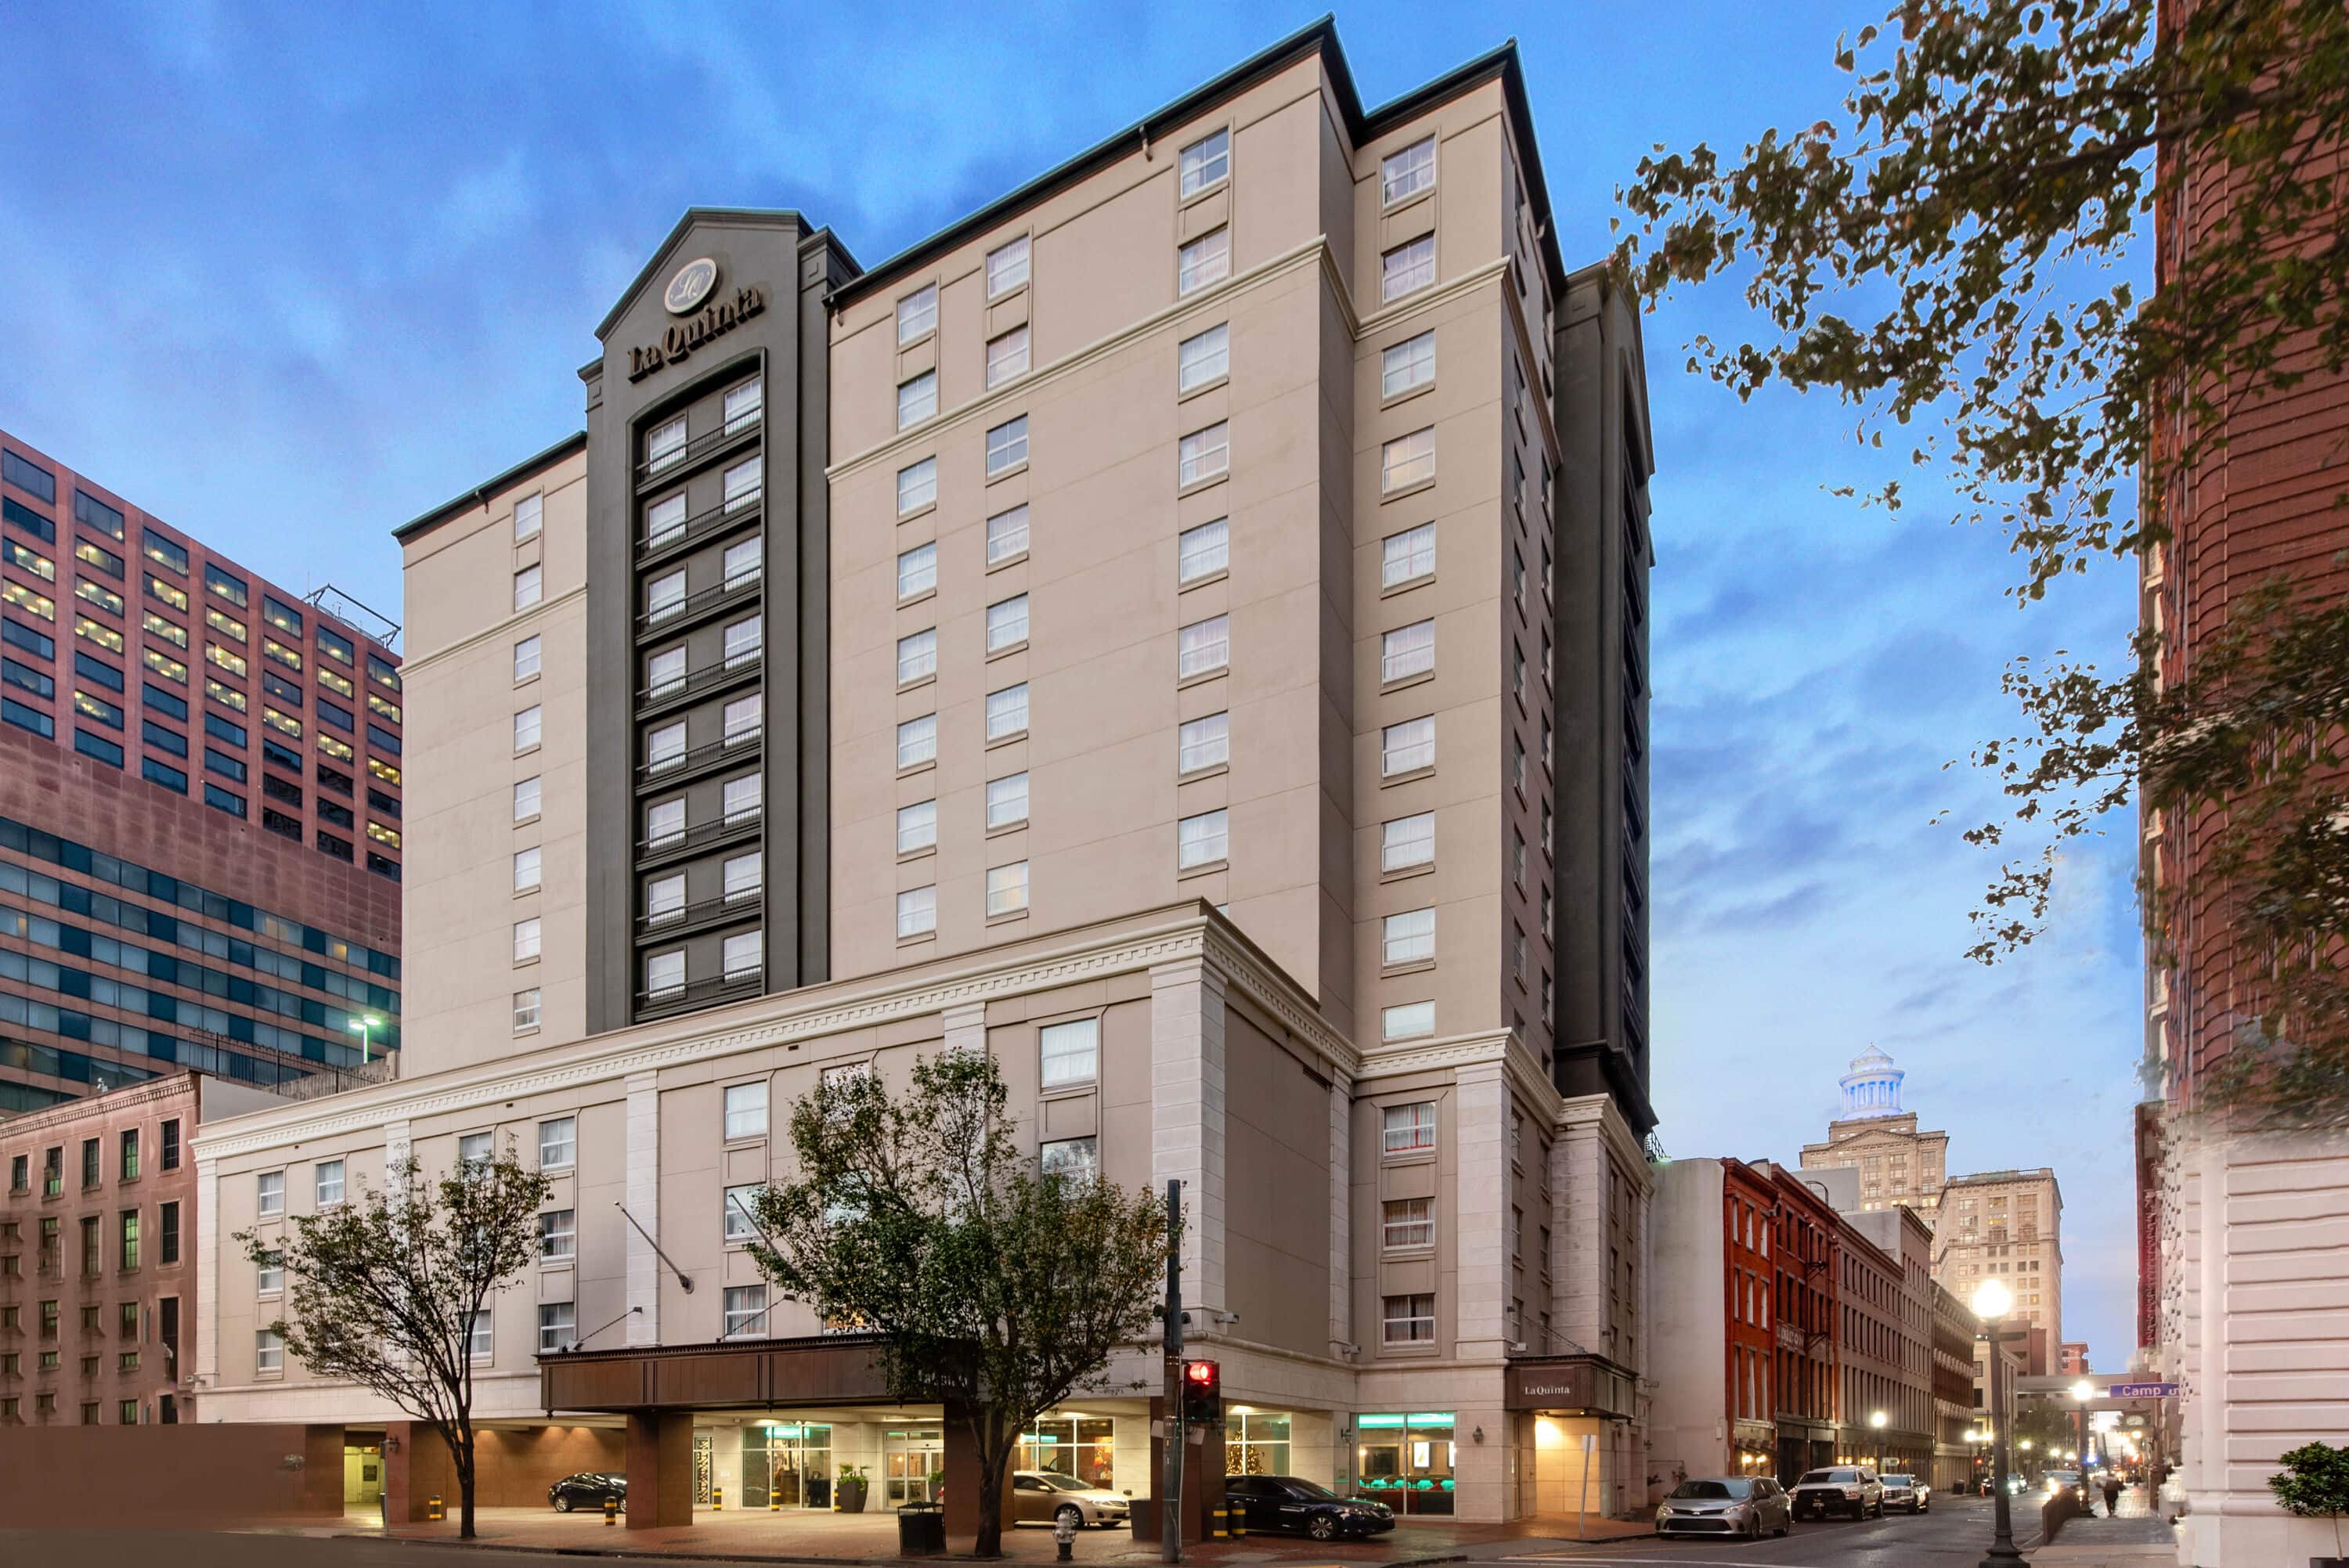 casino hotels in new orleans louisiana